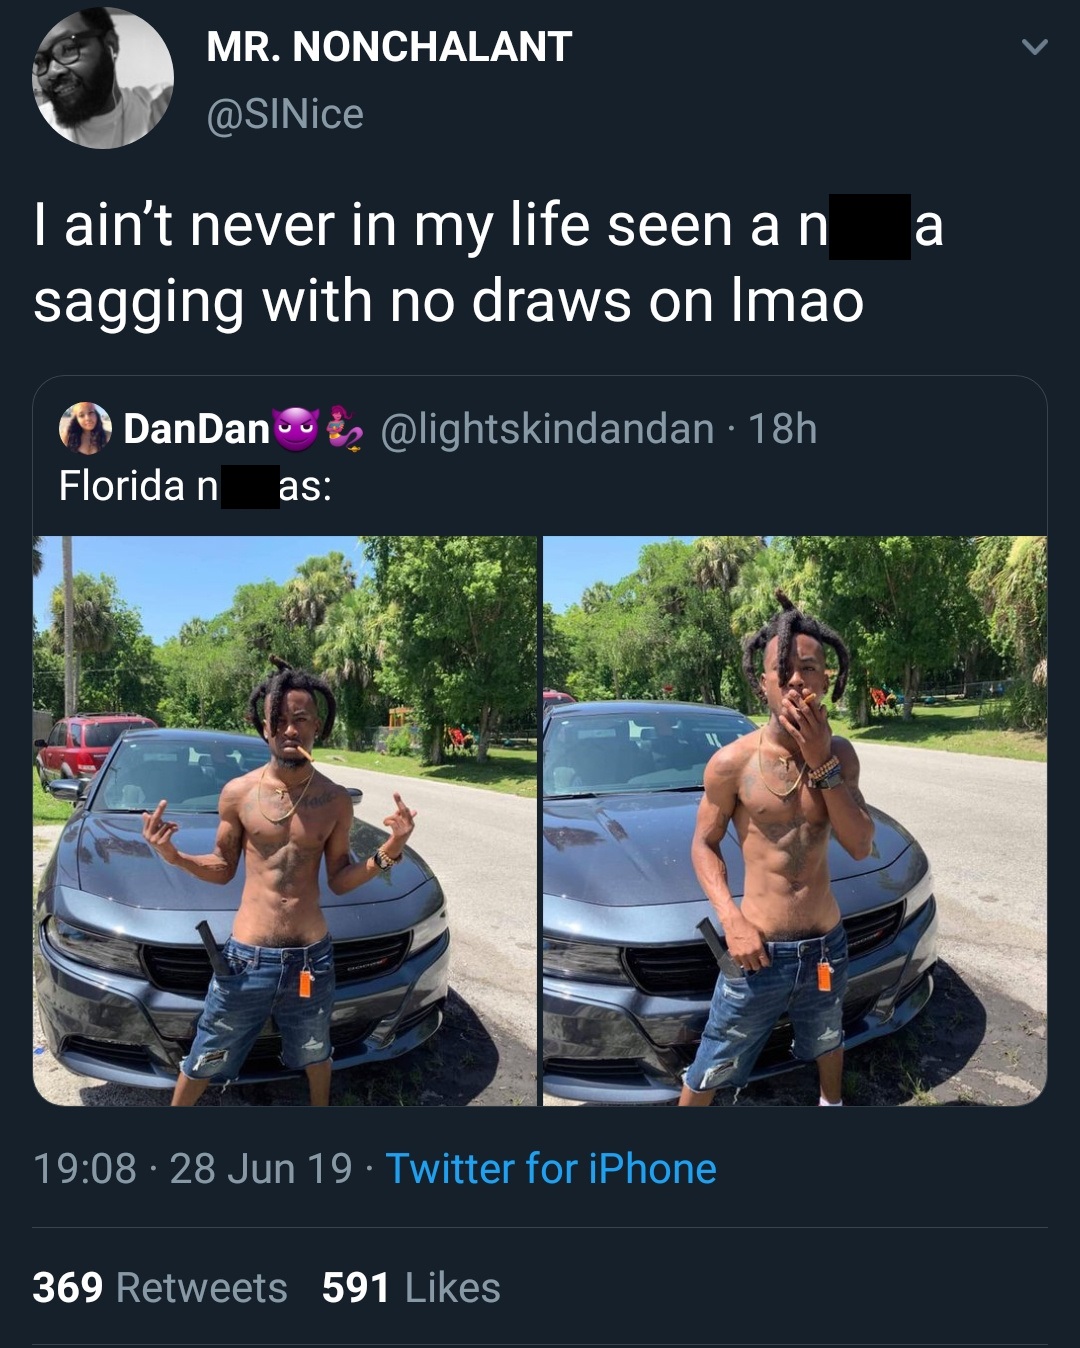 black twitter - I ain't never in my life seen an sagging with no draws on Imao